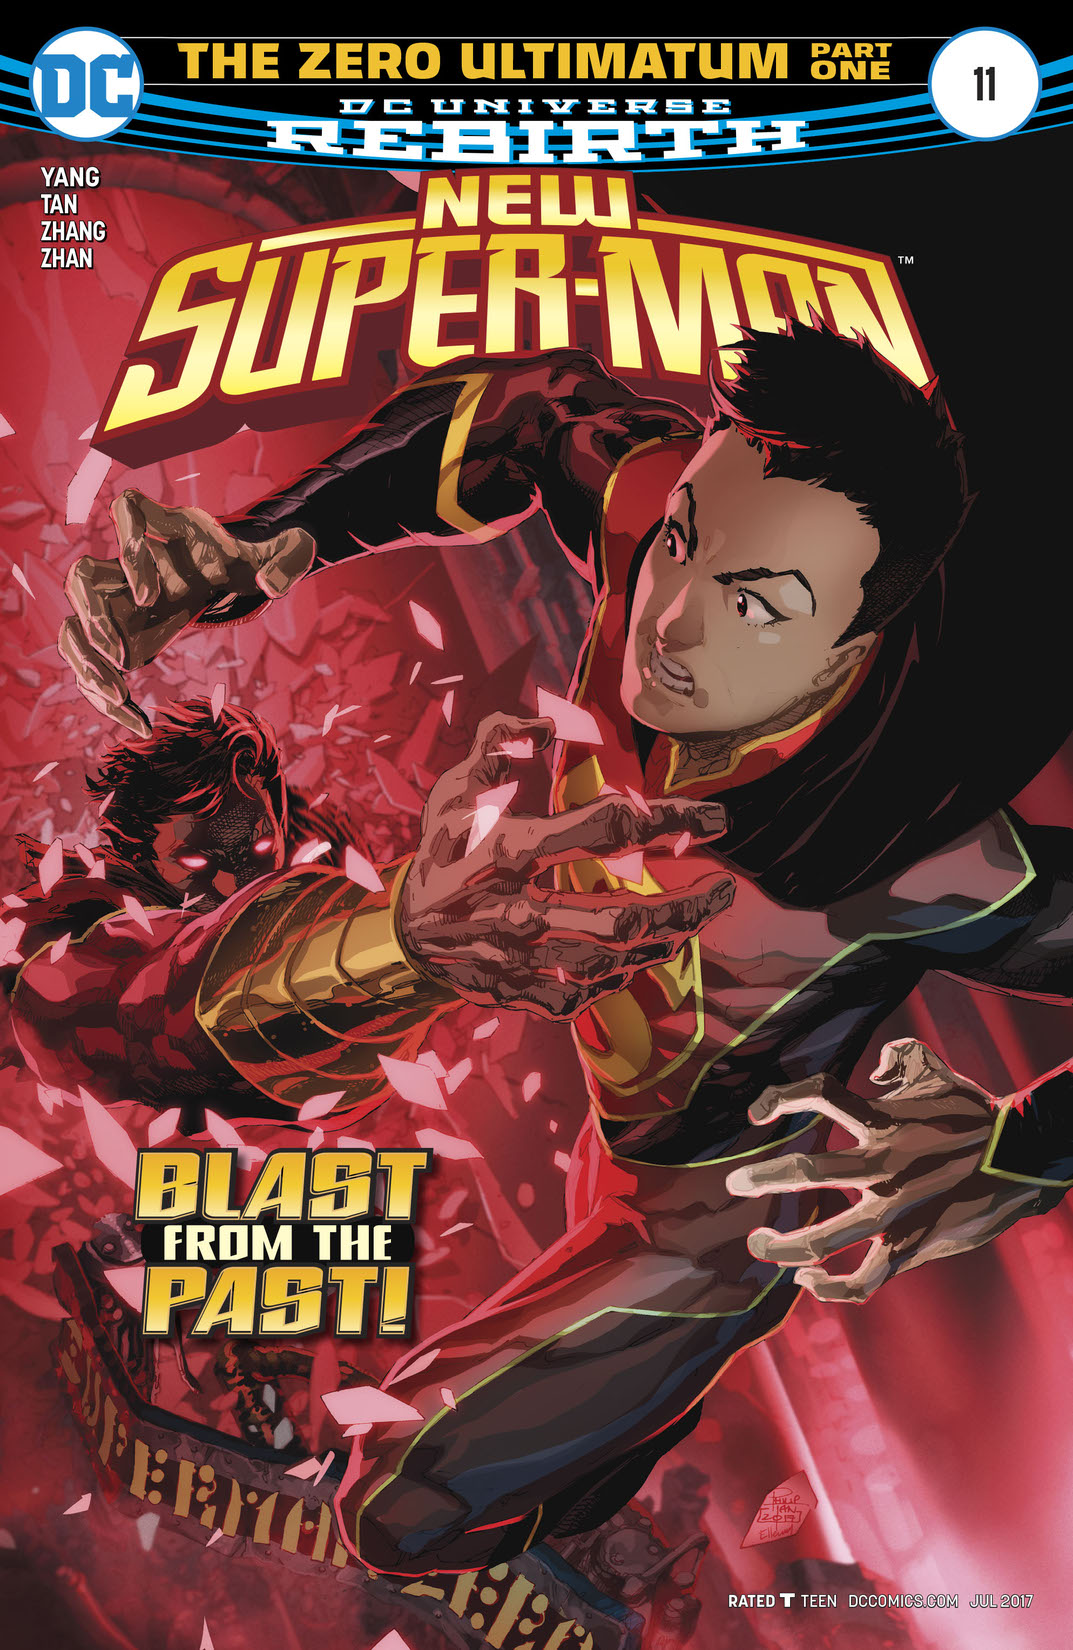 New Super-Man #11 preview images